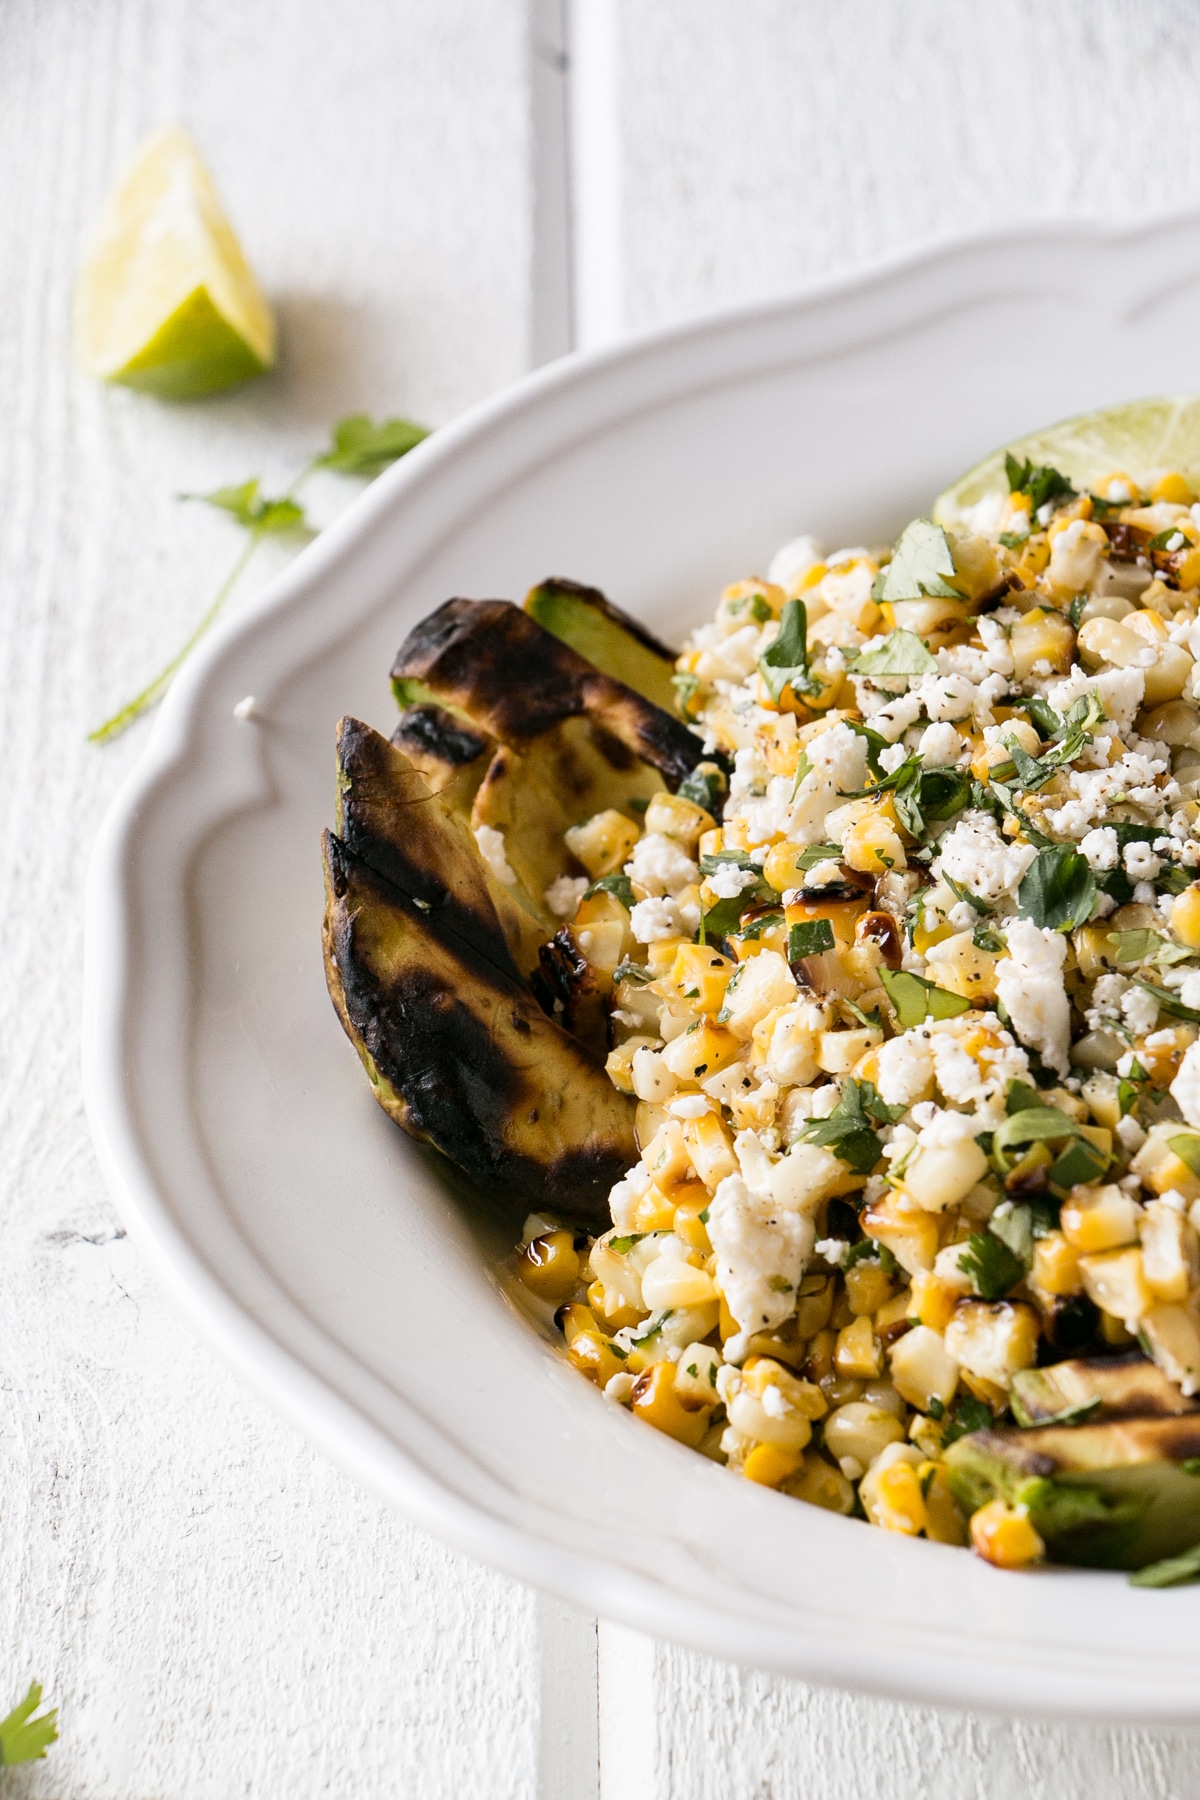 Grilled Corn and Avocado Salad with cilantro and feta cheese in a white serving bowl.